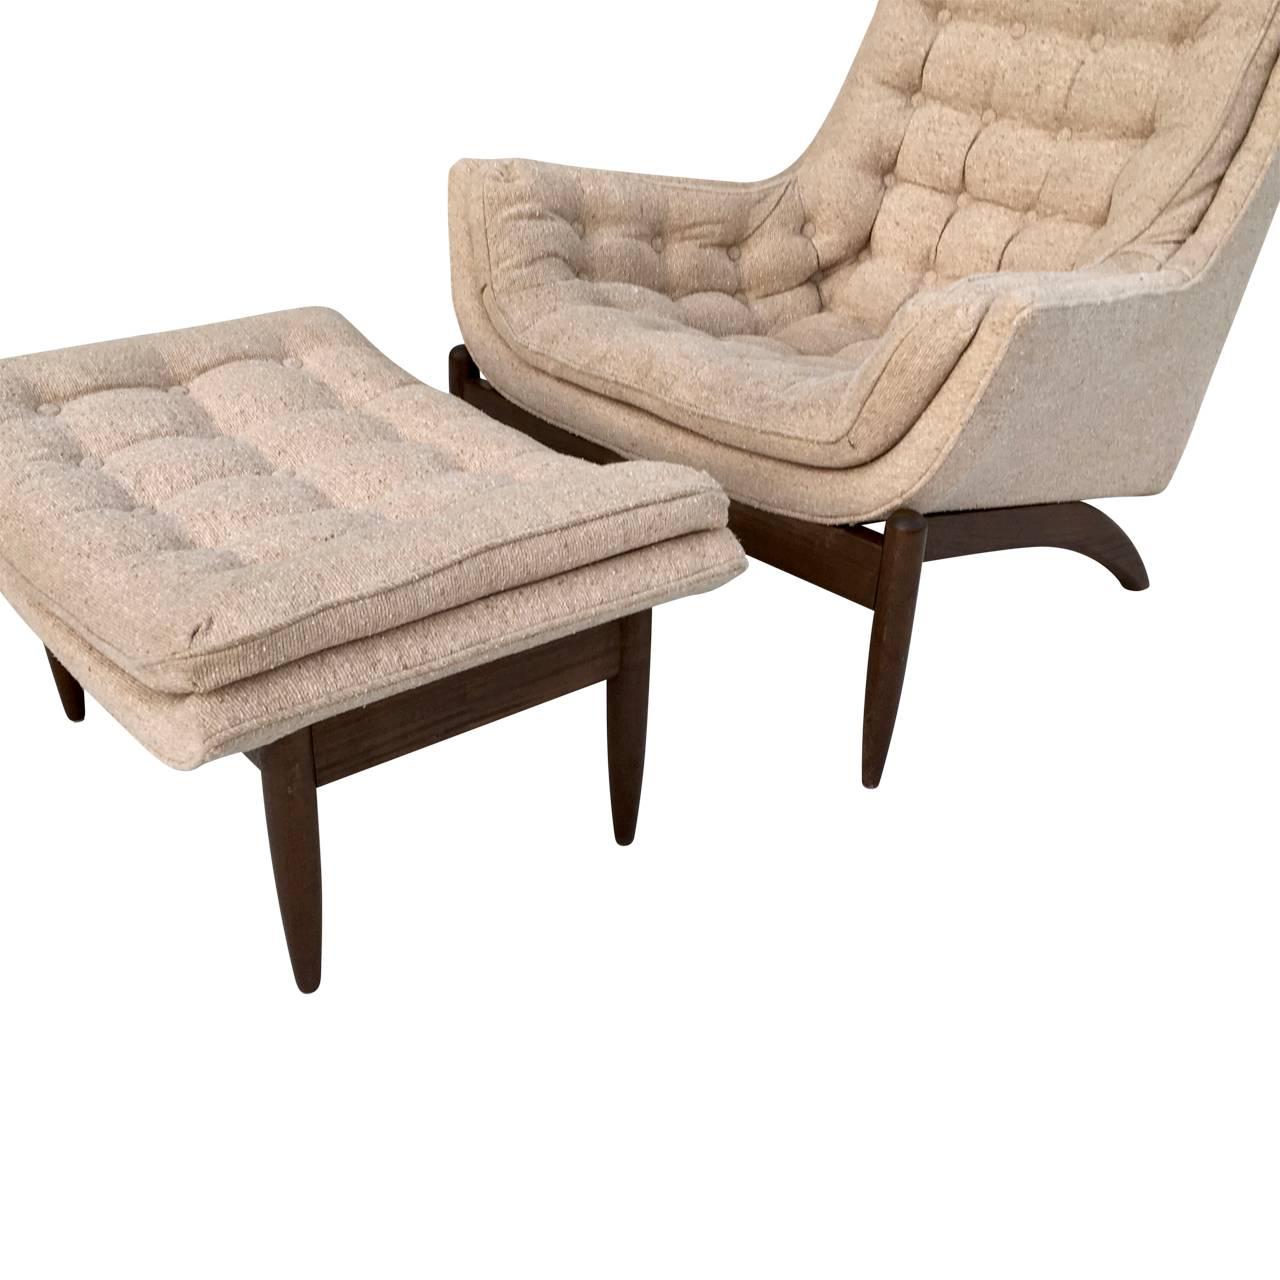 Teak Adrian Pearsall High Back Lounge Chair and Ottoman